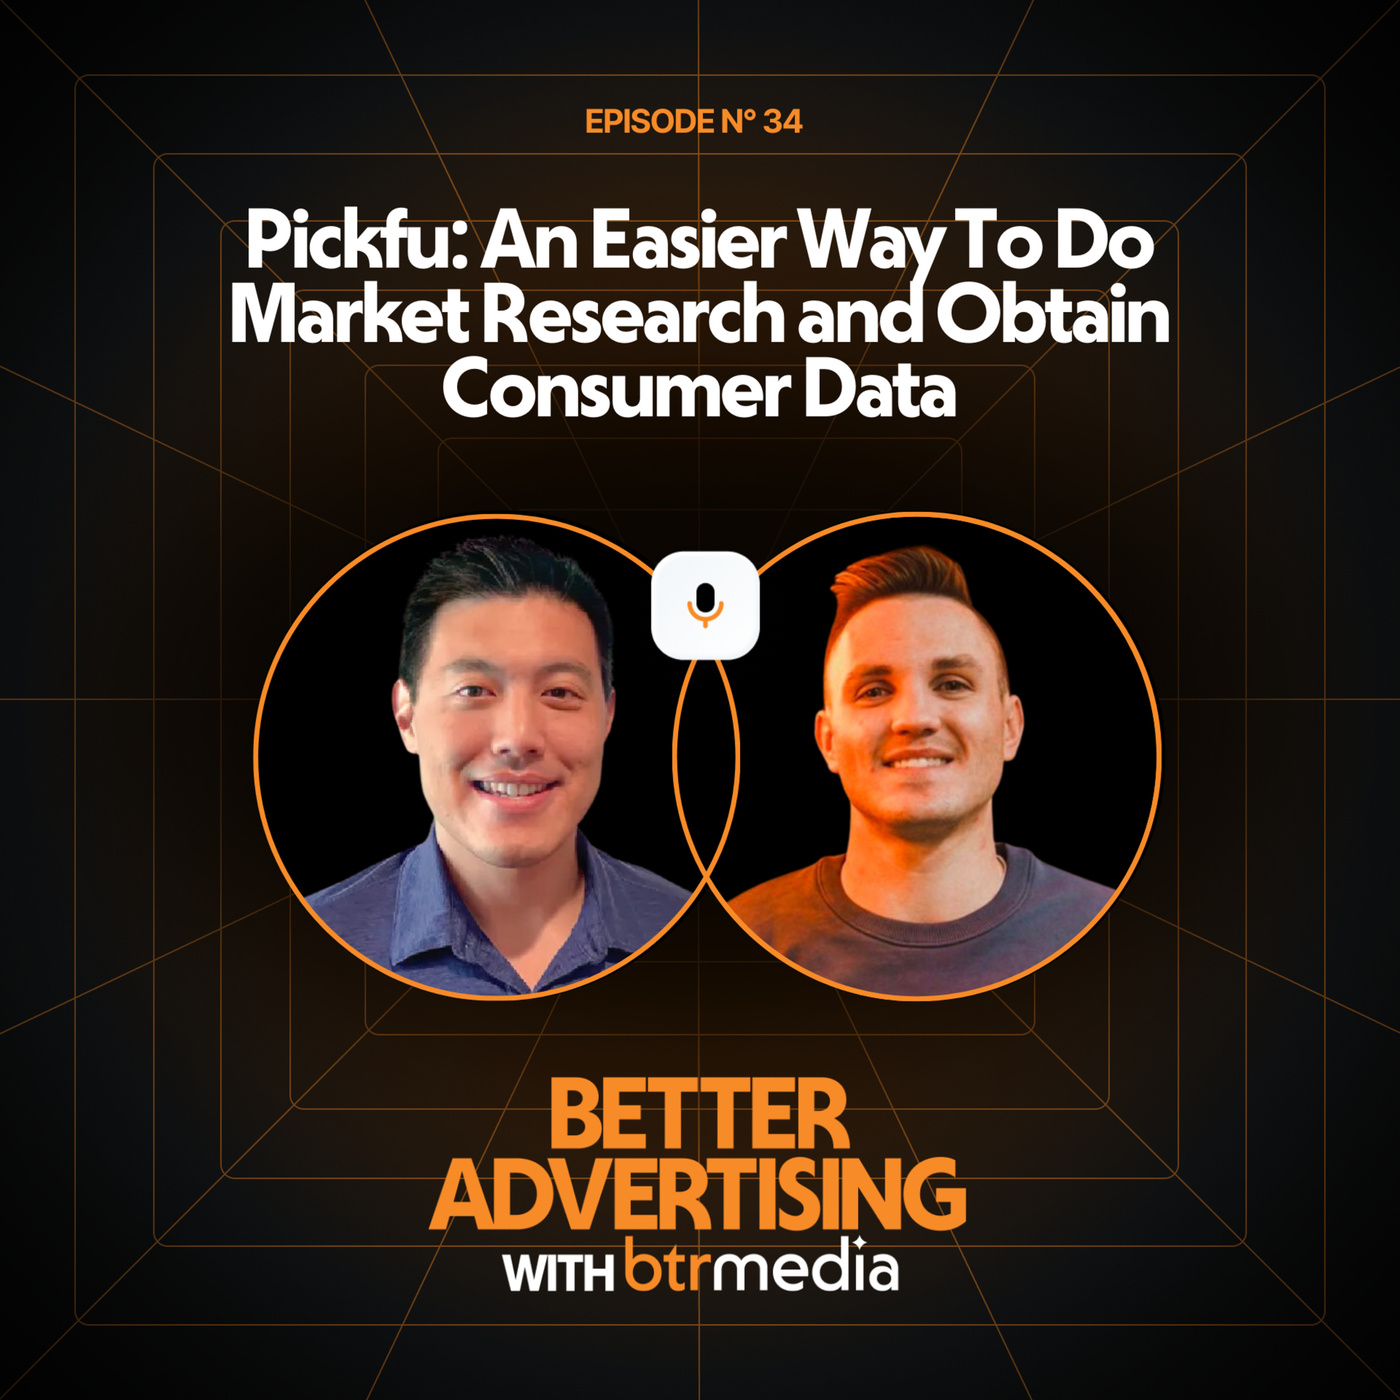 PickFu: An Easier Way To Do Market Research and Obtain Consumer Data